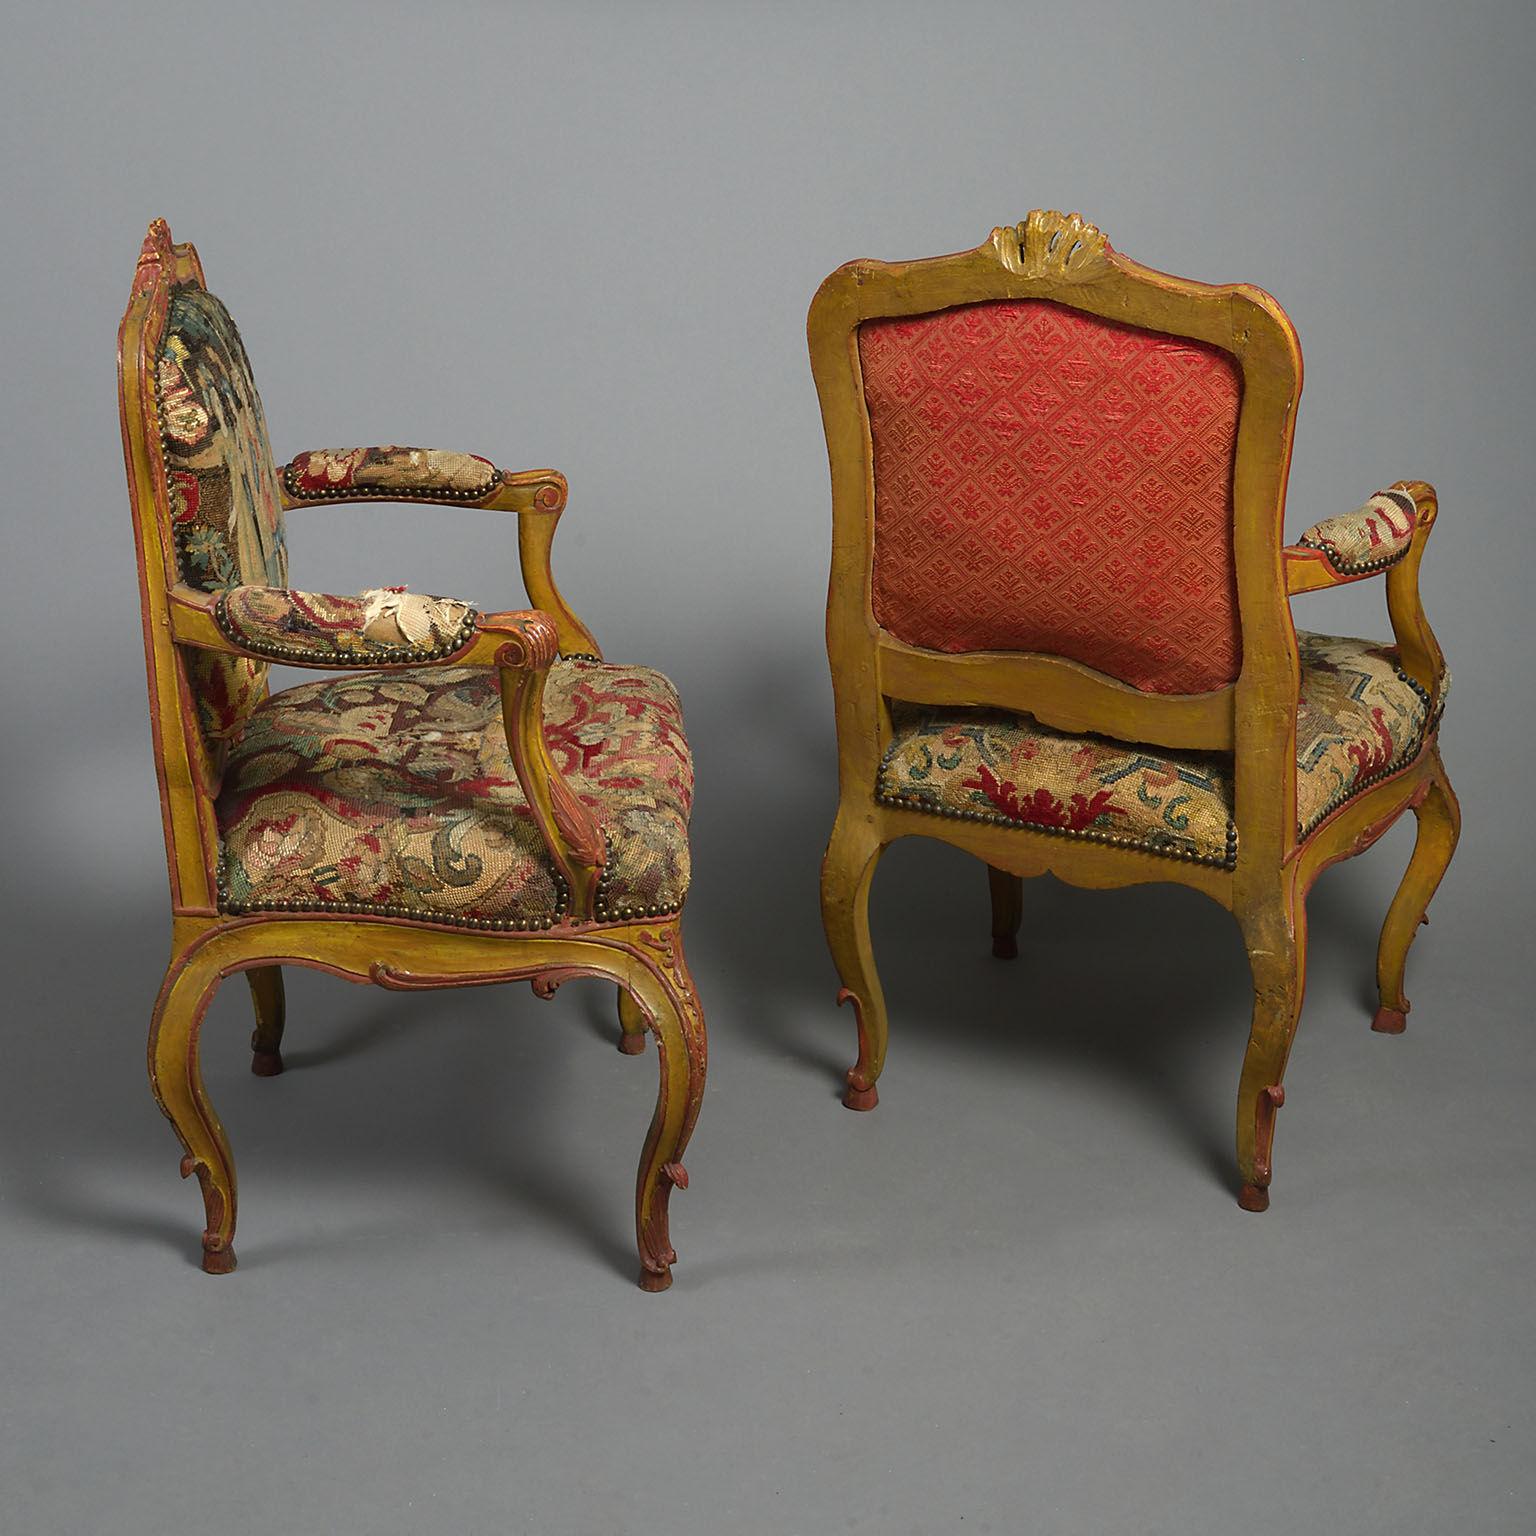 With stuffed cartouche-shaped backs, padded arms and stuffed seats all covered in associated(?) 18th century needlework, the frames and cabriole legs carved with Rococo scrollwork,painted decoration refreshed.